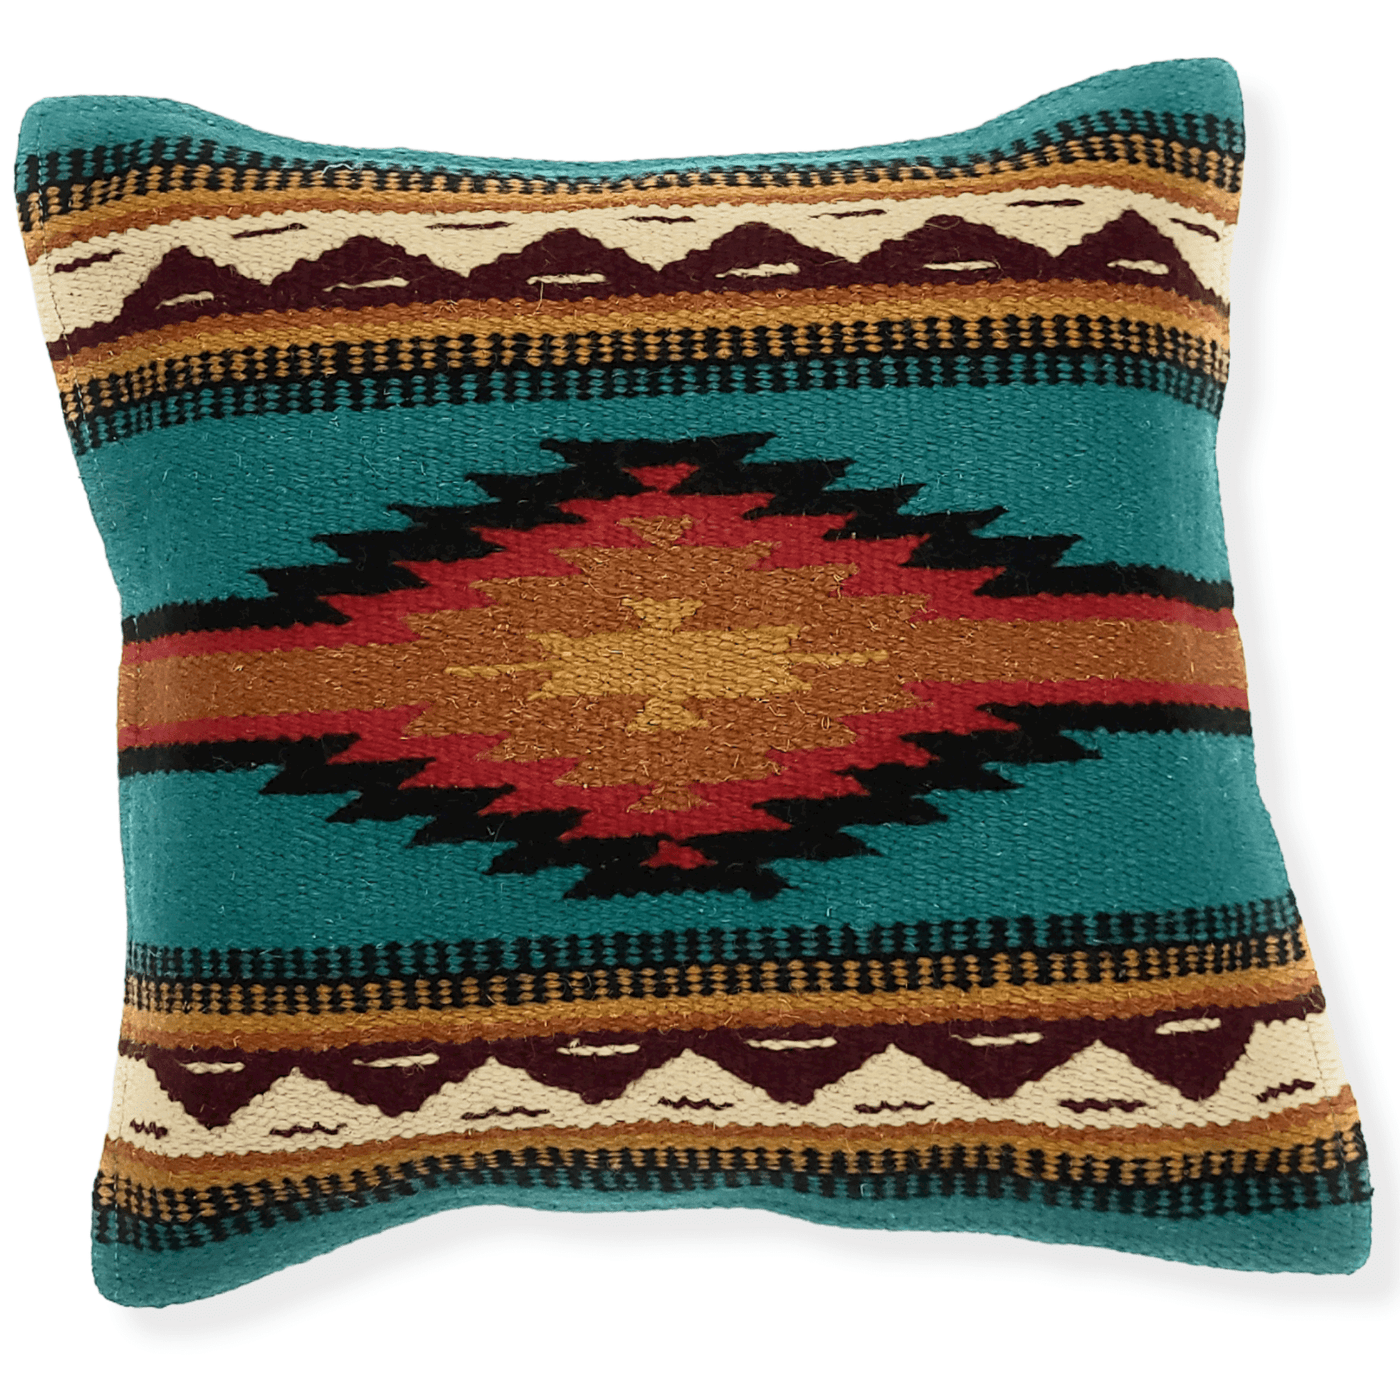 Western Pillow Covers 18 x 18 Woven Wool Turquoise Color Southwestern Decor  Throw Pillow